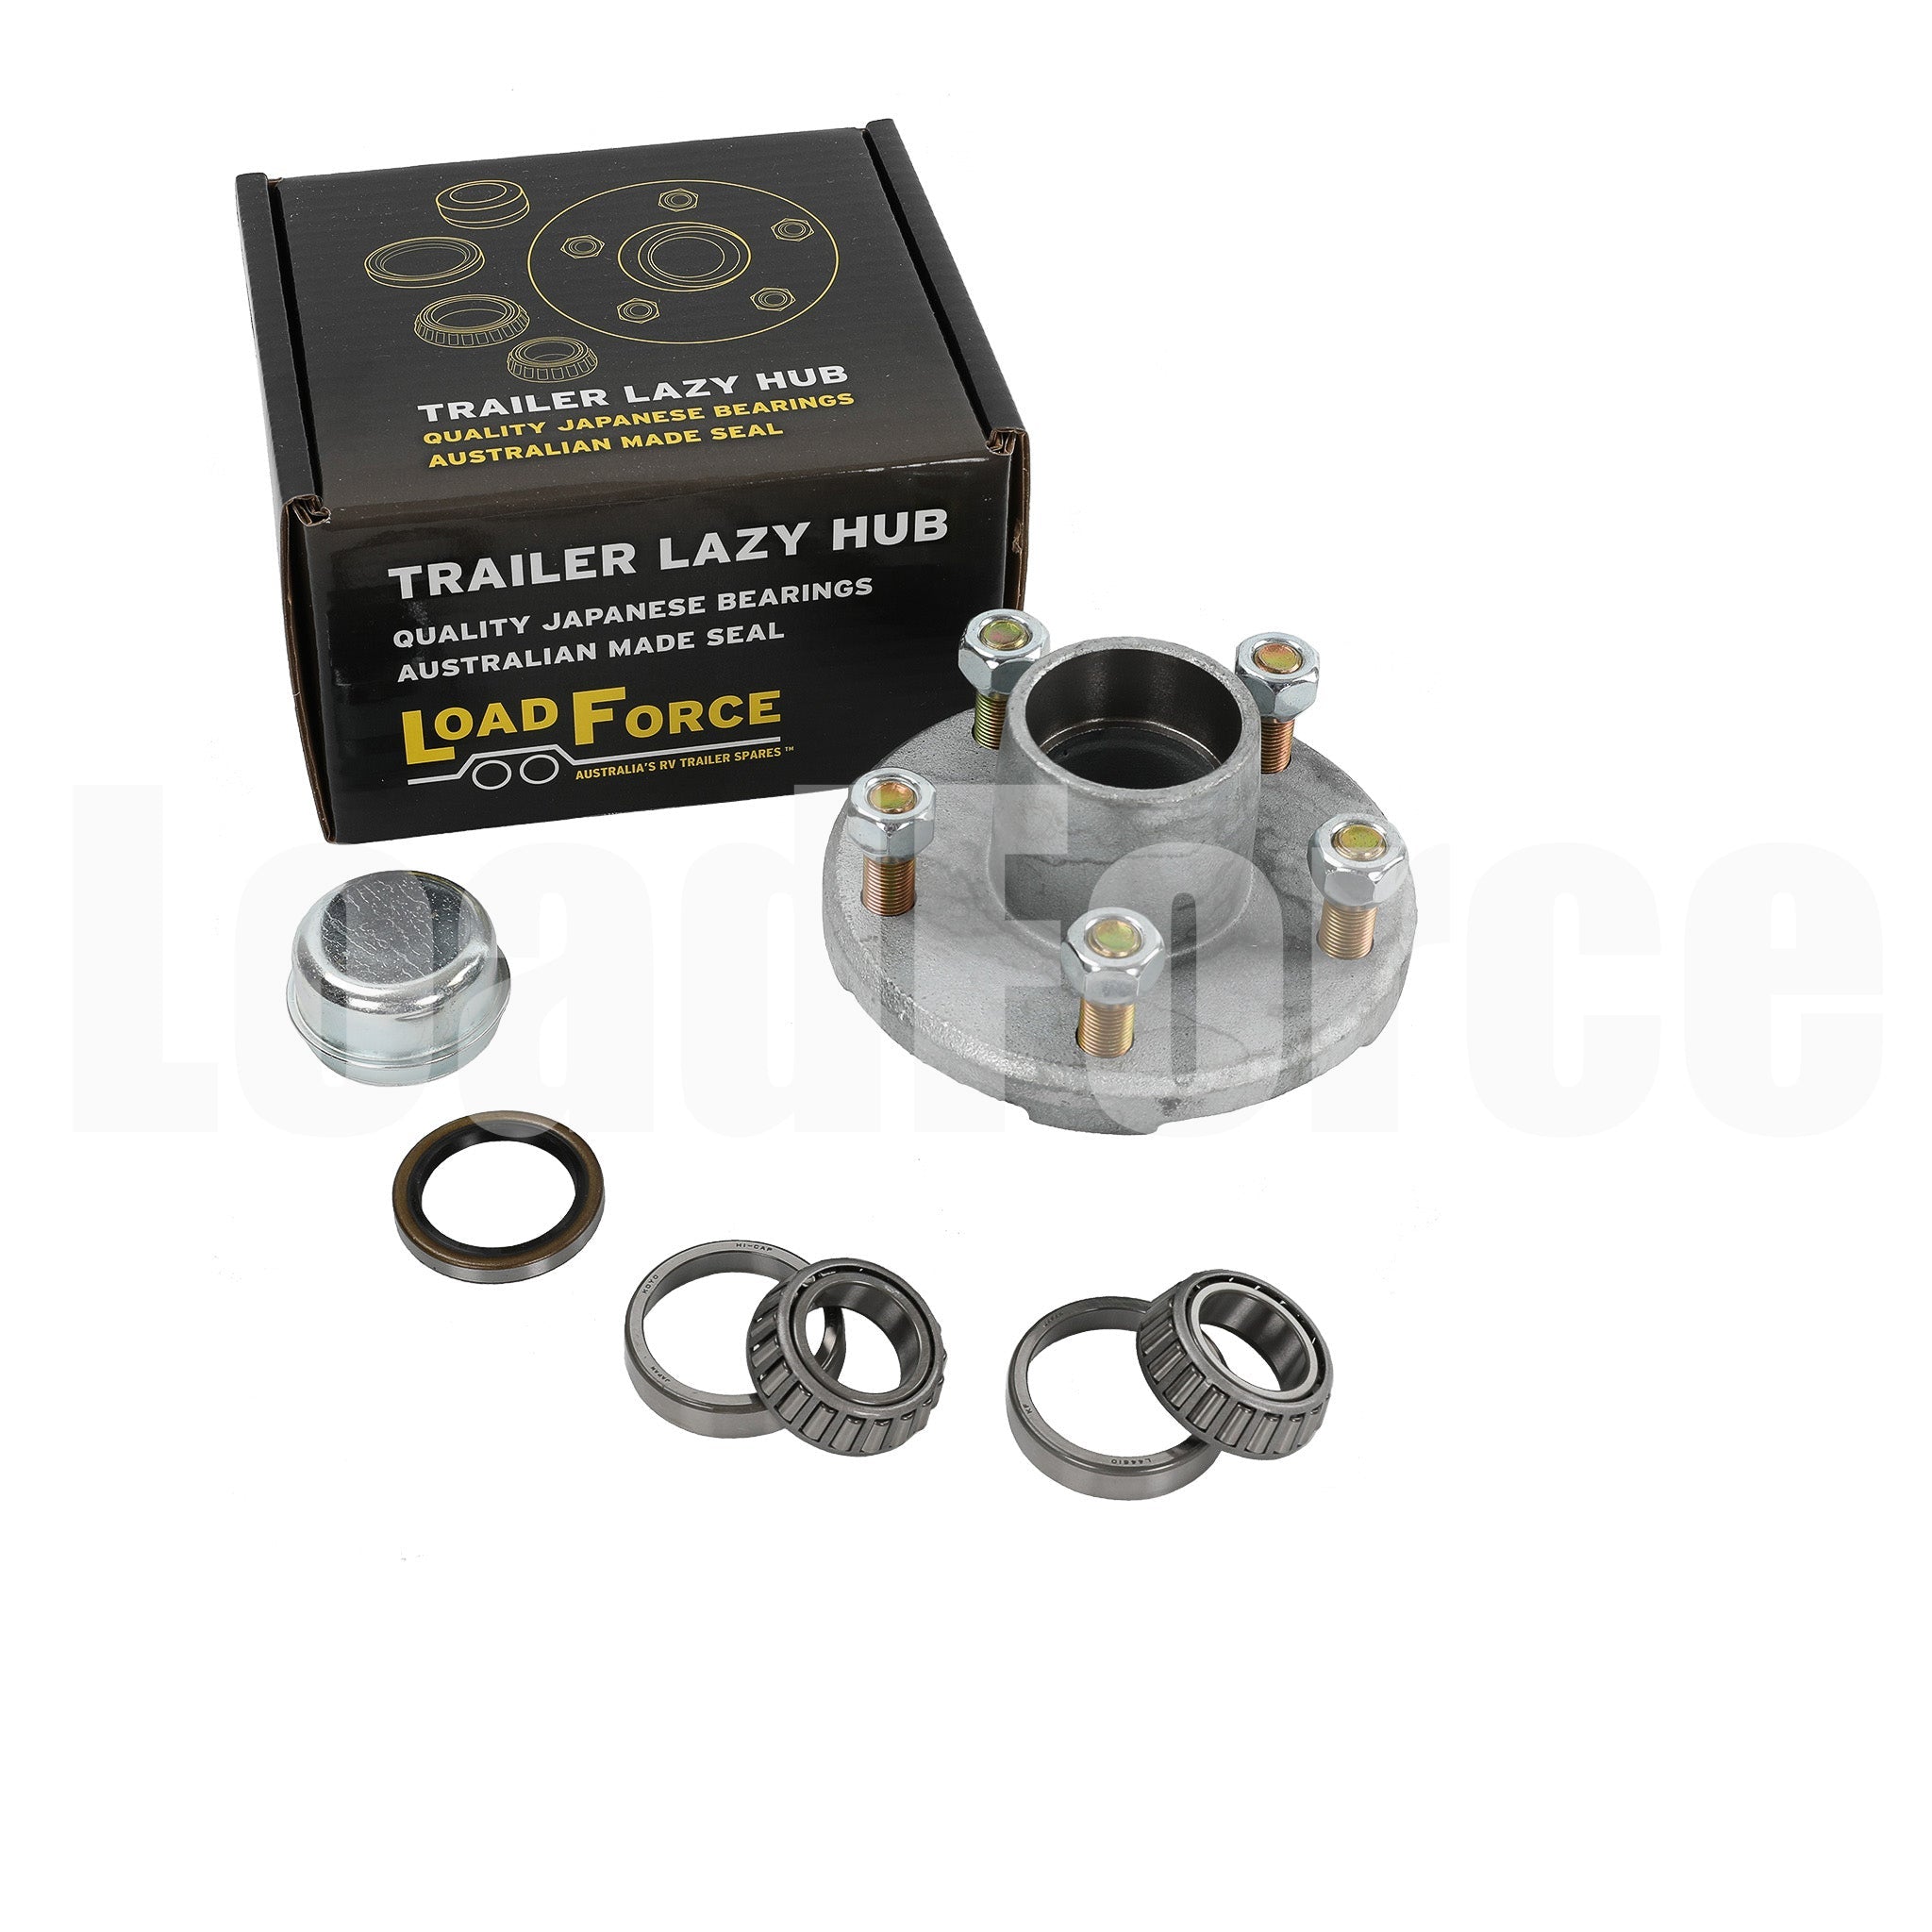 LoadForce 5.5 inch hub assembly 5 stud, 4.5inch PCD (Ford) galvanised USA 2000lb axles